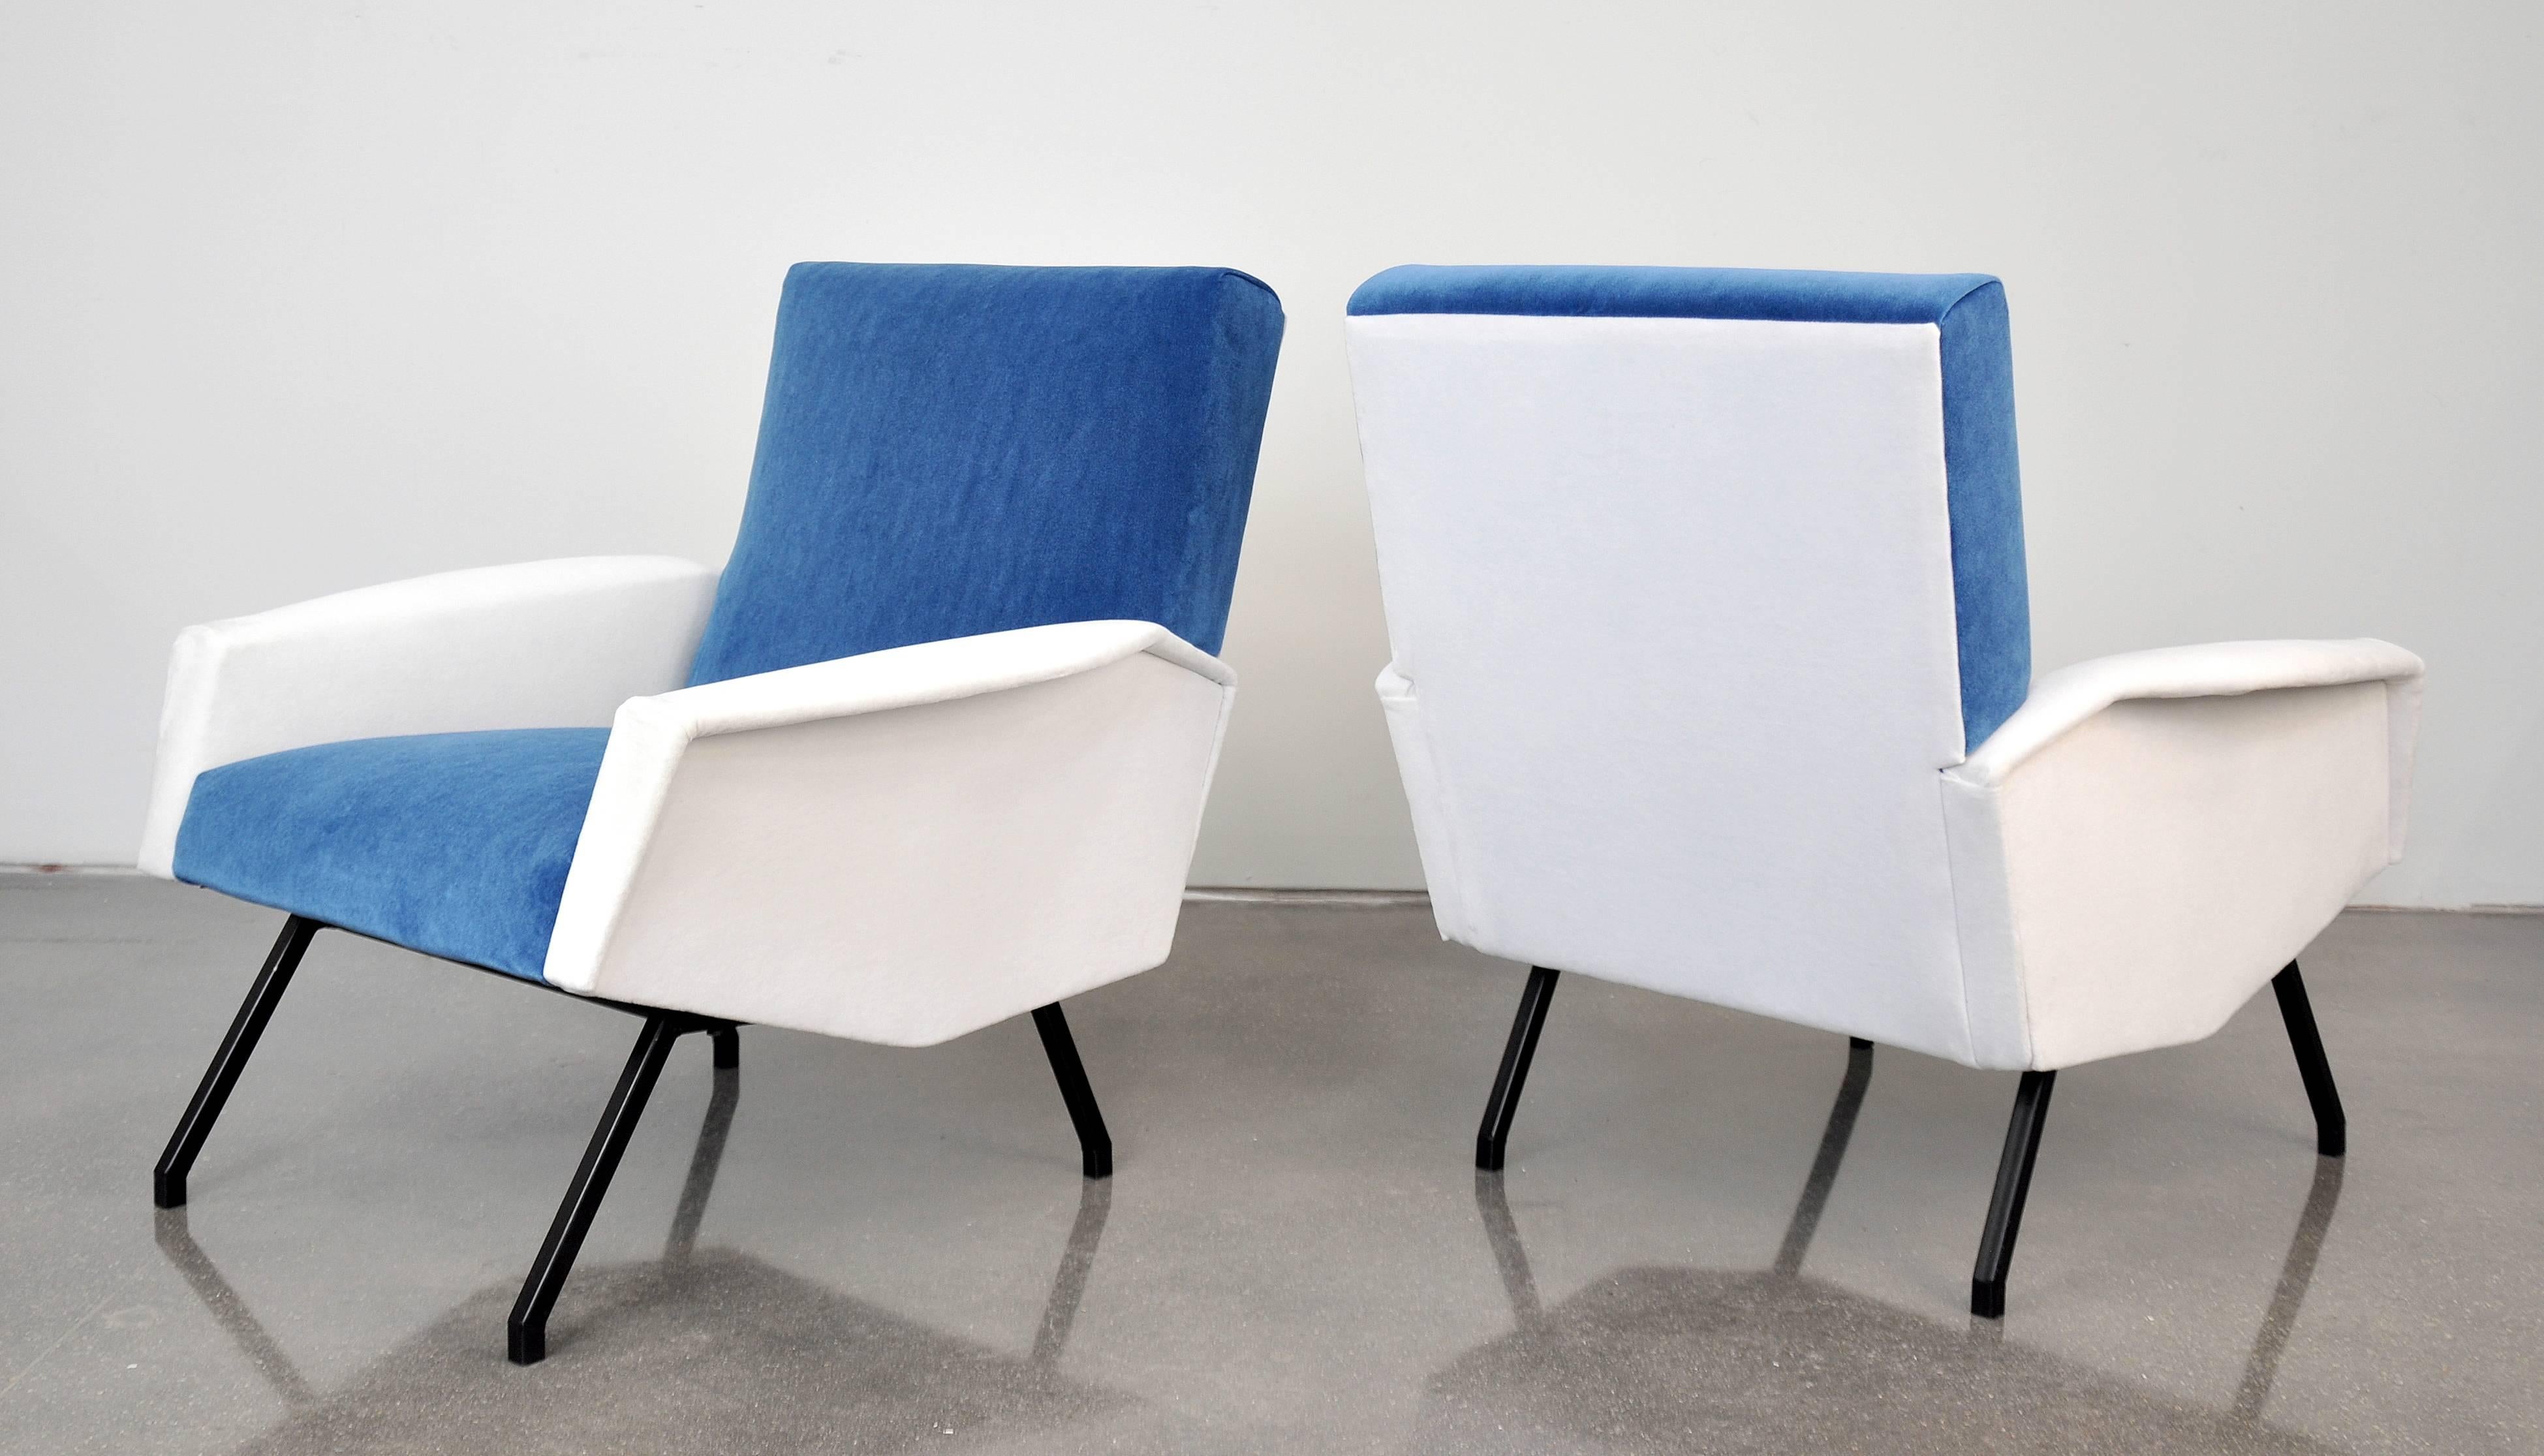 A gorgeous pair of Mid-Century Modern poltrone or club chairs with black lacquered iron legs, in the style of Gio Ponti, made in Italy in the 1950s. The armchairs have been recovered in an azure sky or light sapphire blue and white velvet. They are